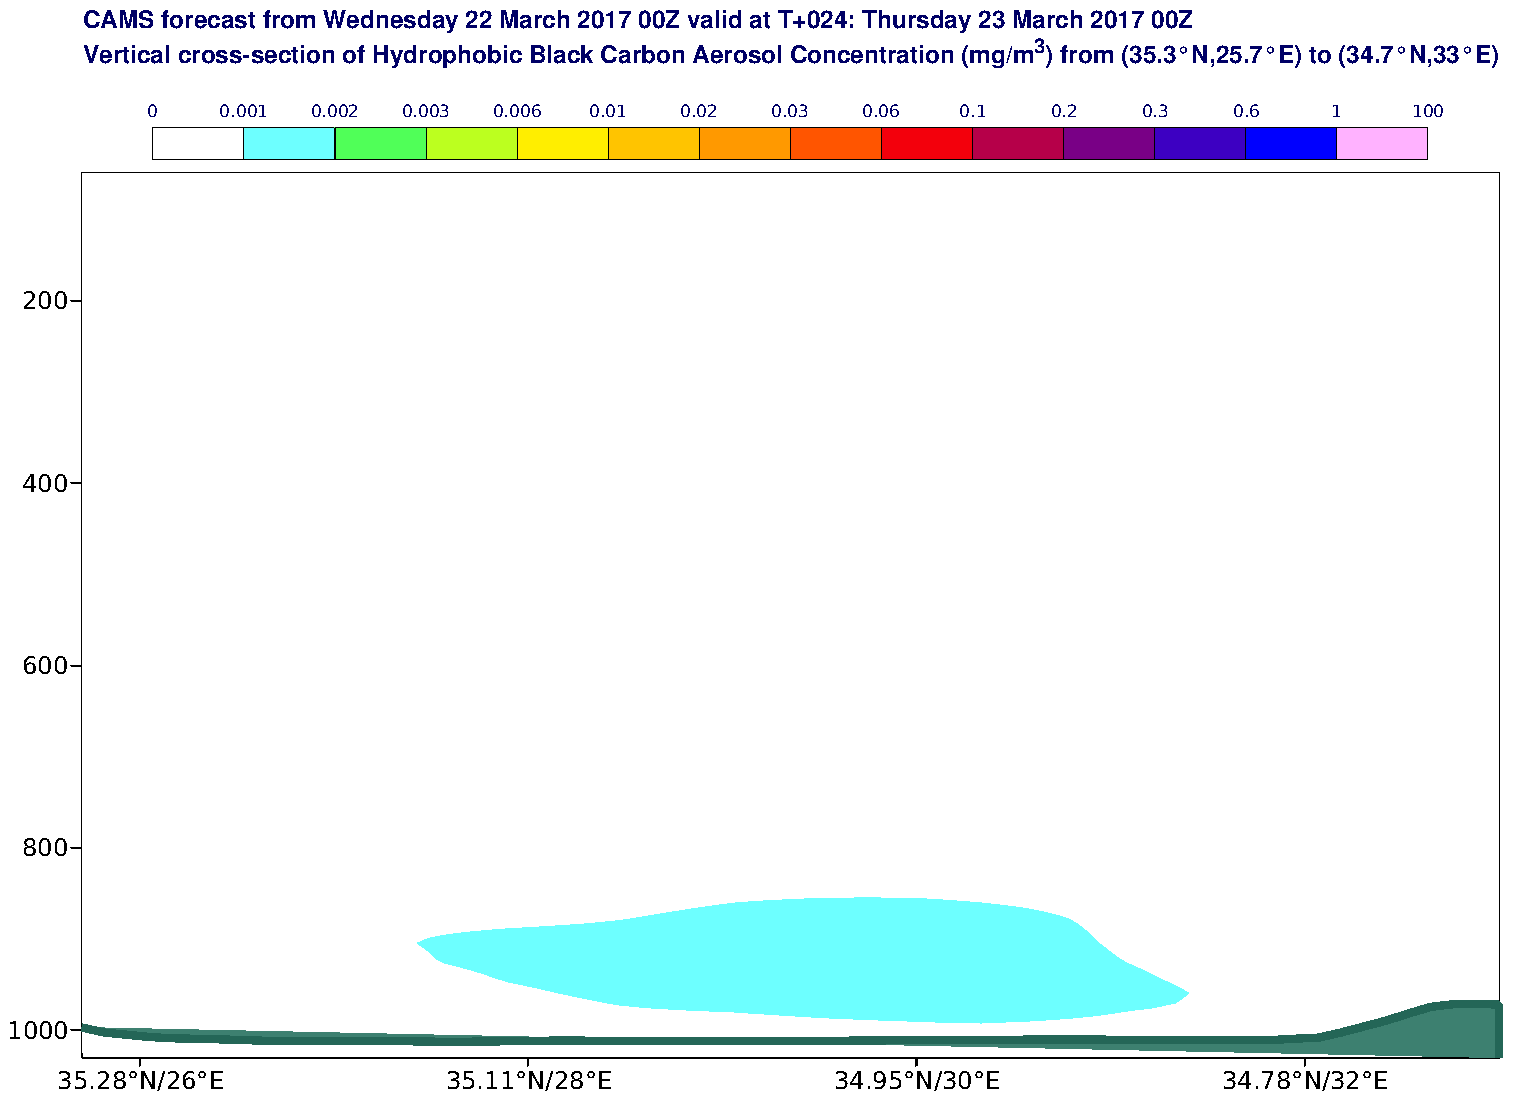 Vertical cross-section of Hydrophobic Black Carbon Aerosol Concentration (mg/m3) valid at T24 - 2017-03-23 00:00